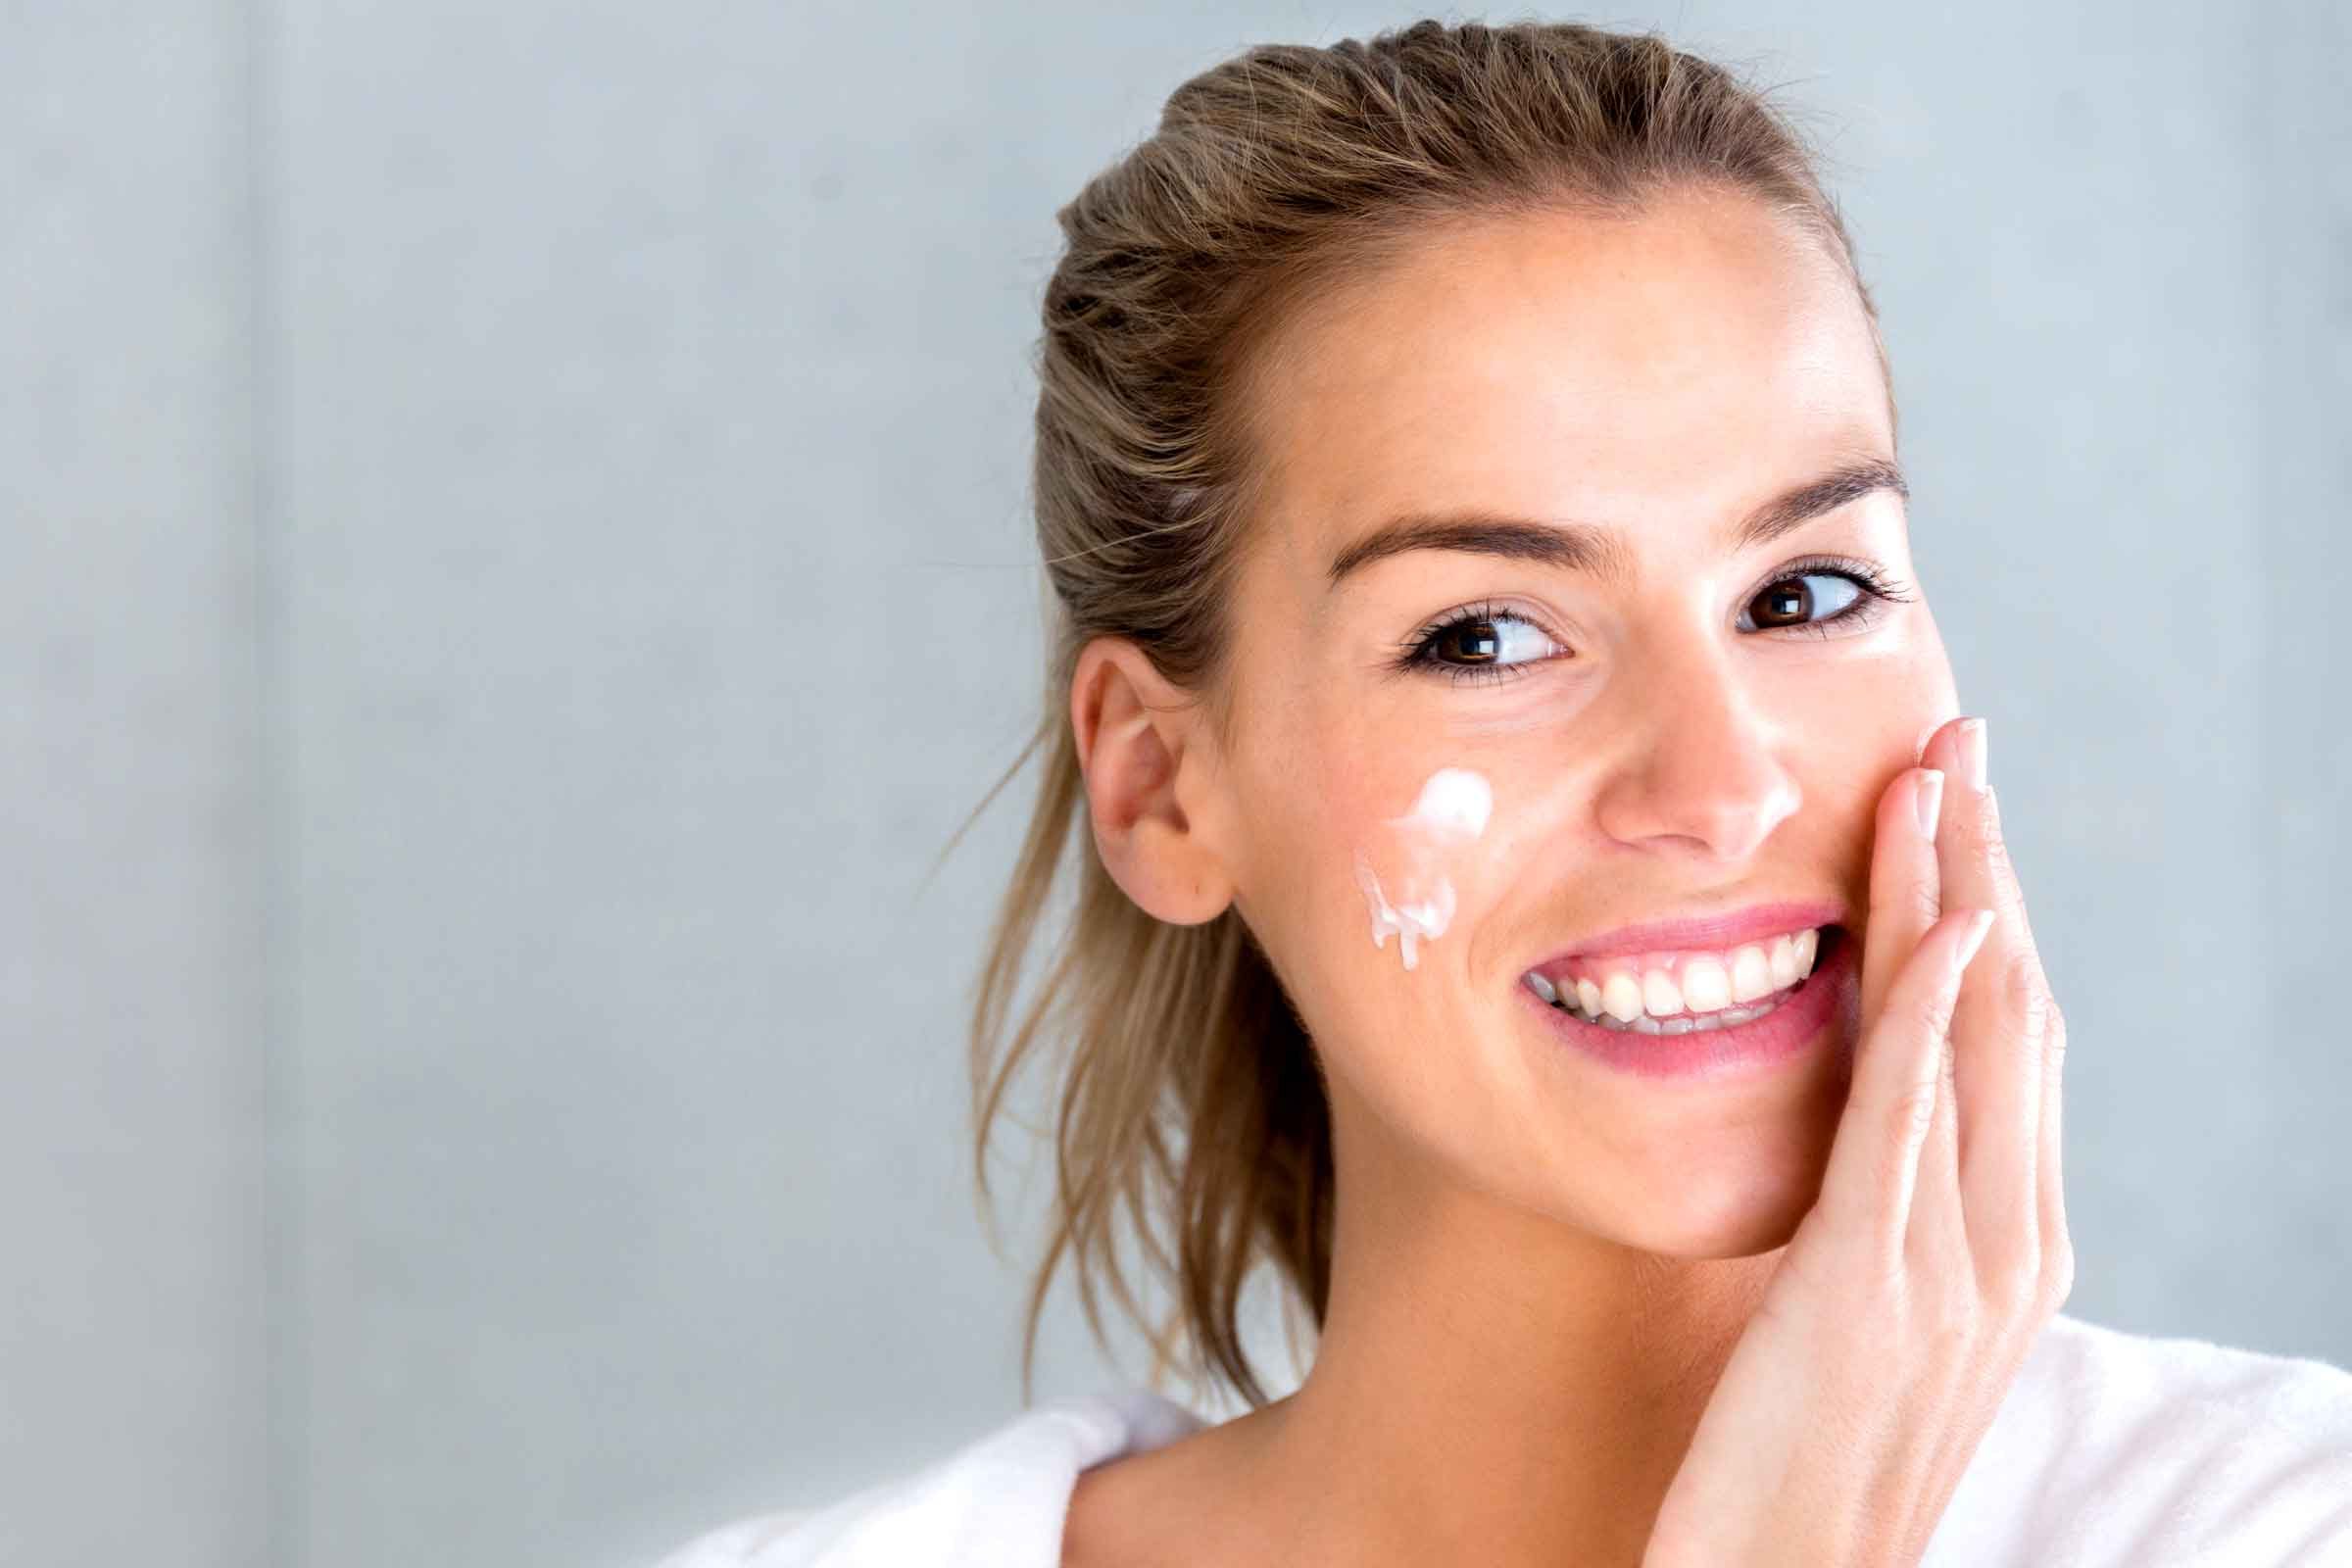 10 Makeup Mistakes That Make Your Skin Look Dry and Flaky